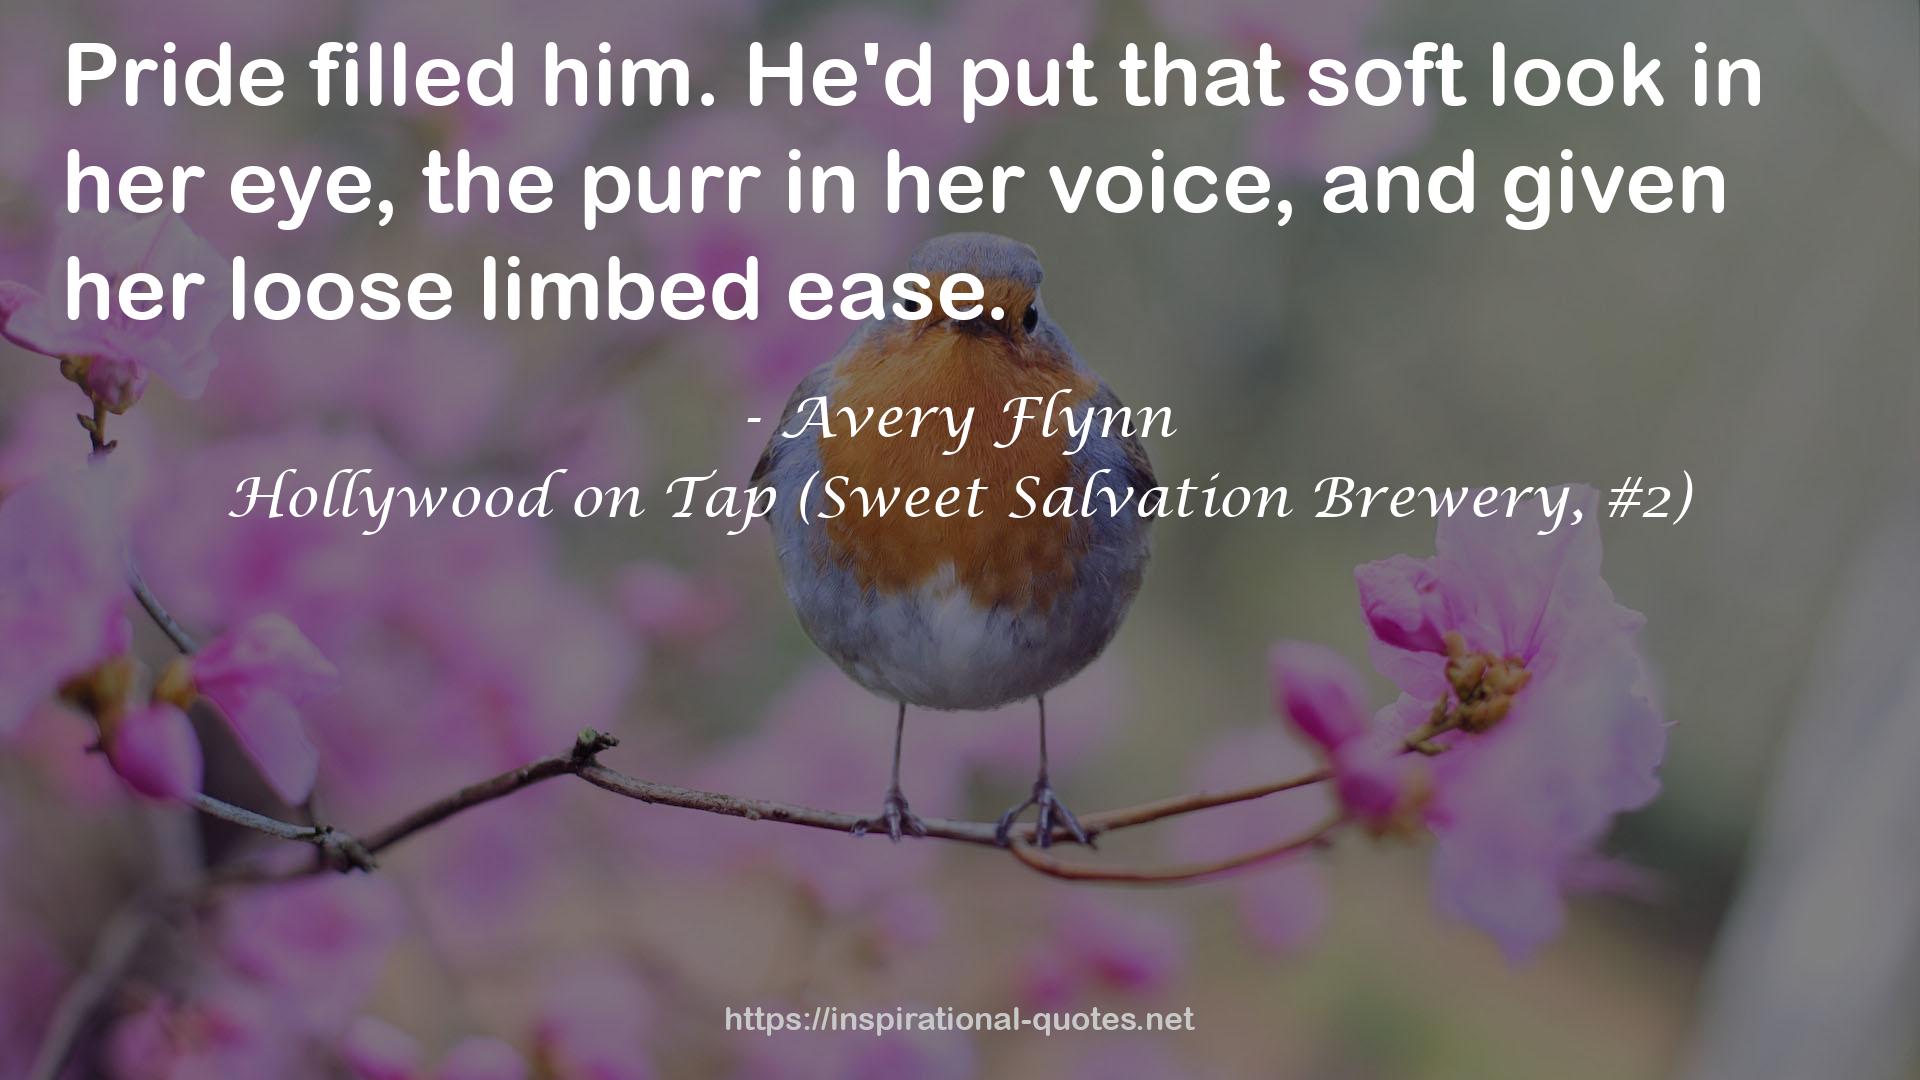 Hollywood on Tap (Sweet Salvation Brewery, #2) QUOTES